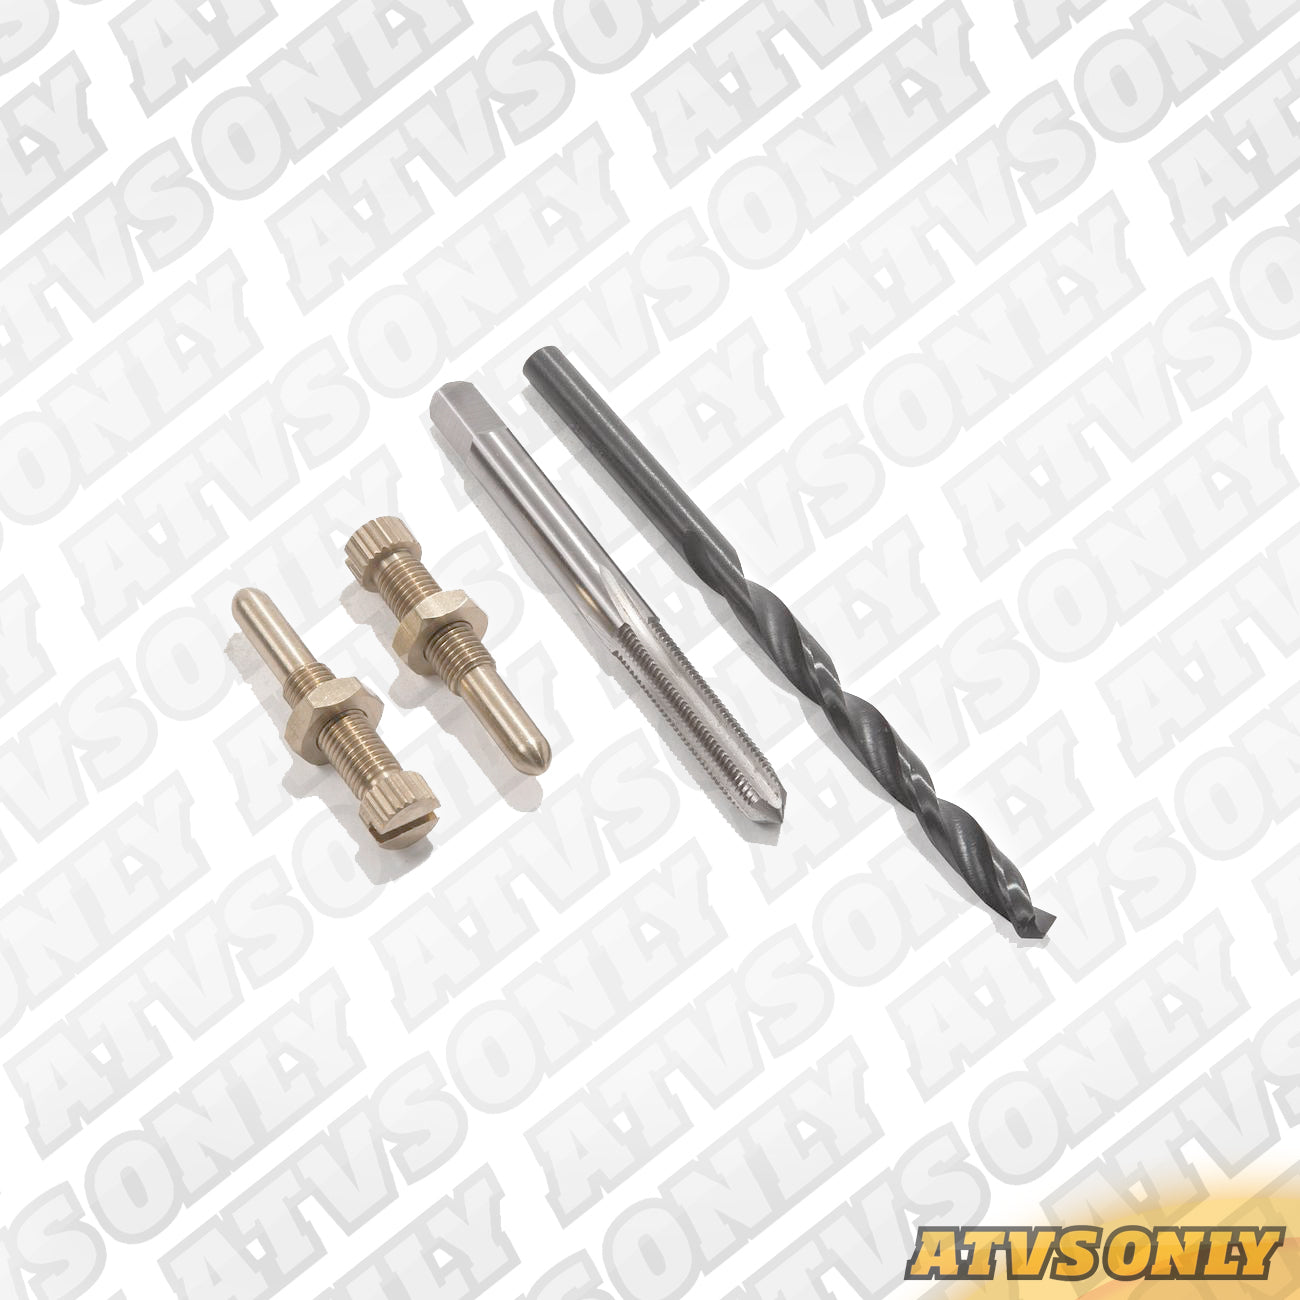 Idle Screw Kit with Drill and Tap for Yamaha Applications